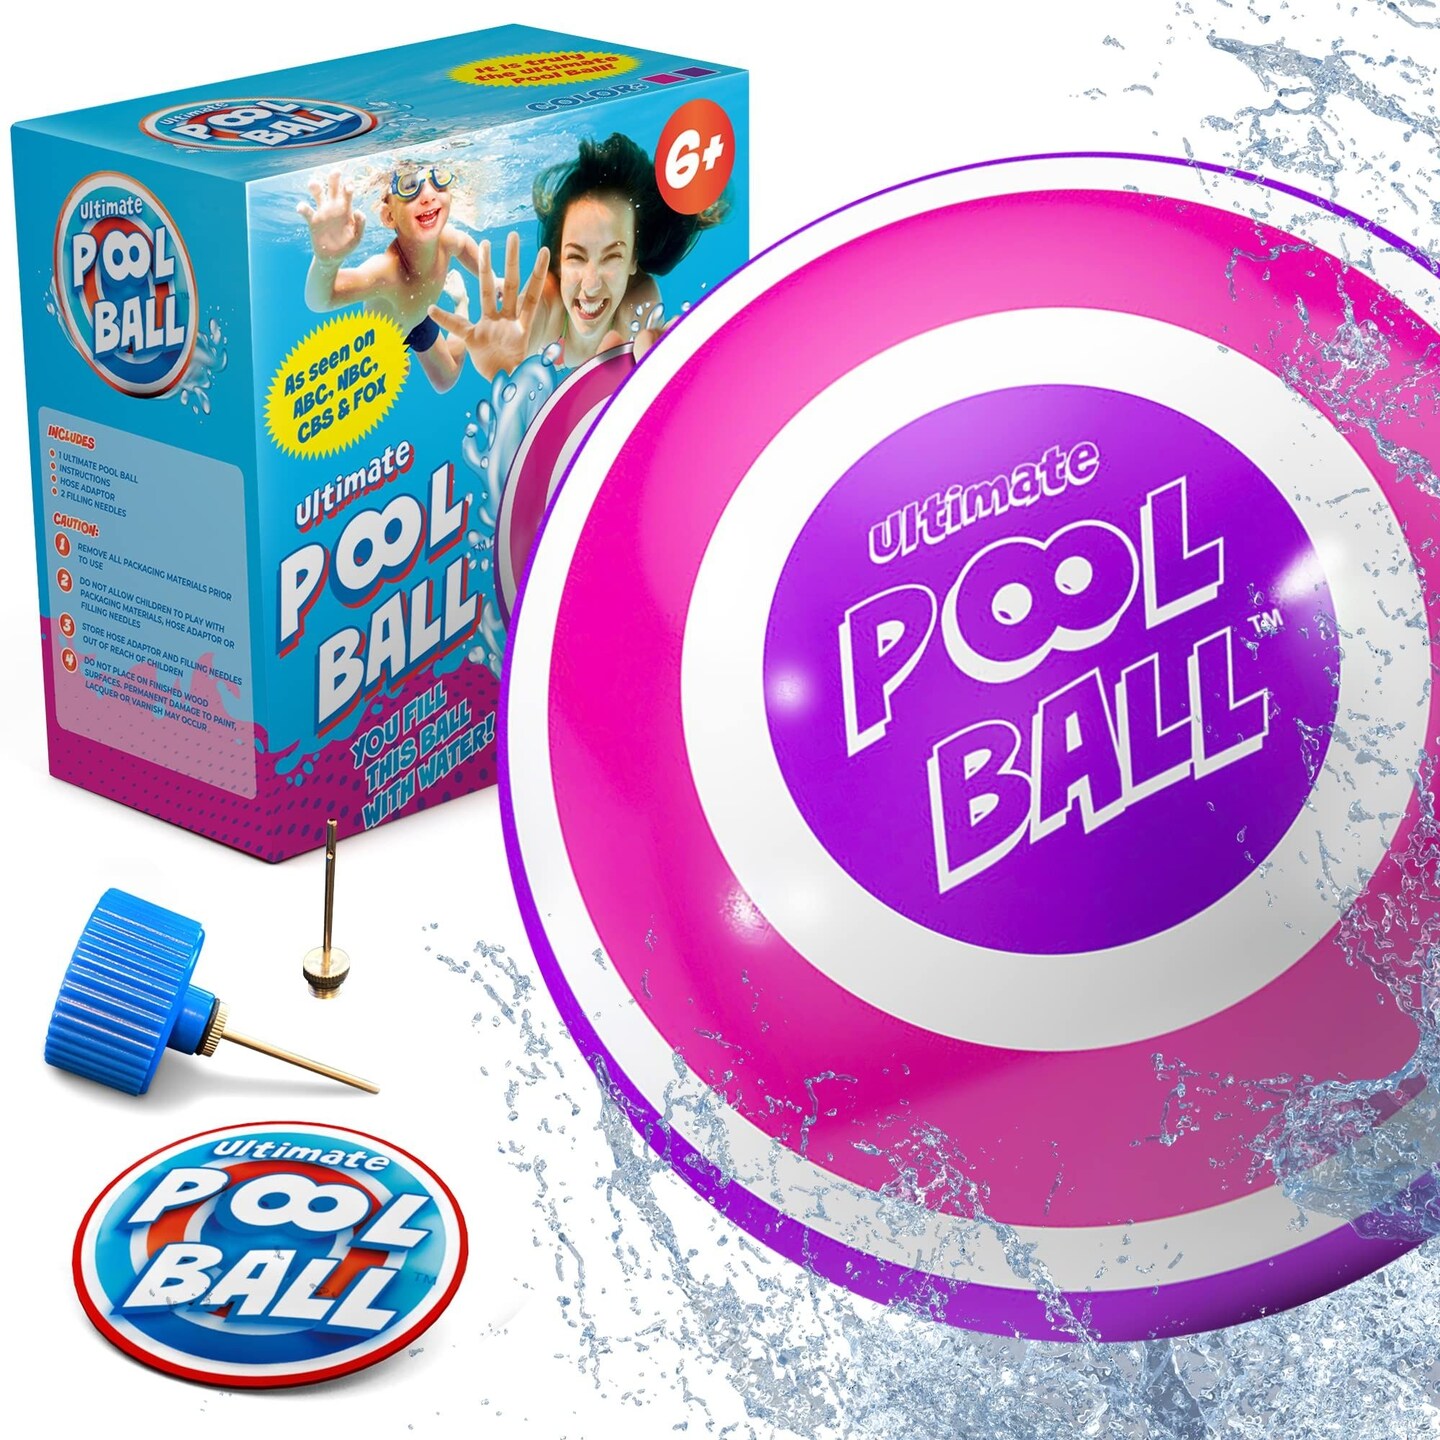 Activ Life The Ultimate Pool Ball - Fill It with Water for Underwater Games! Top Pool Toys for Girls &#x26; Boys Age 6+ Tweens &#x26; Teens - Fun Summer Toy for Kids - Top Spring Break Beach Holiday Essentials